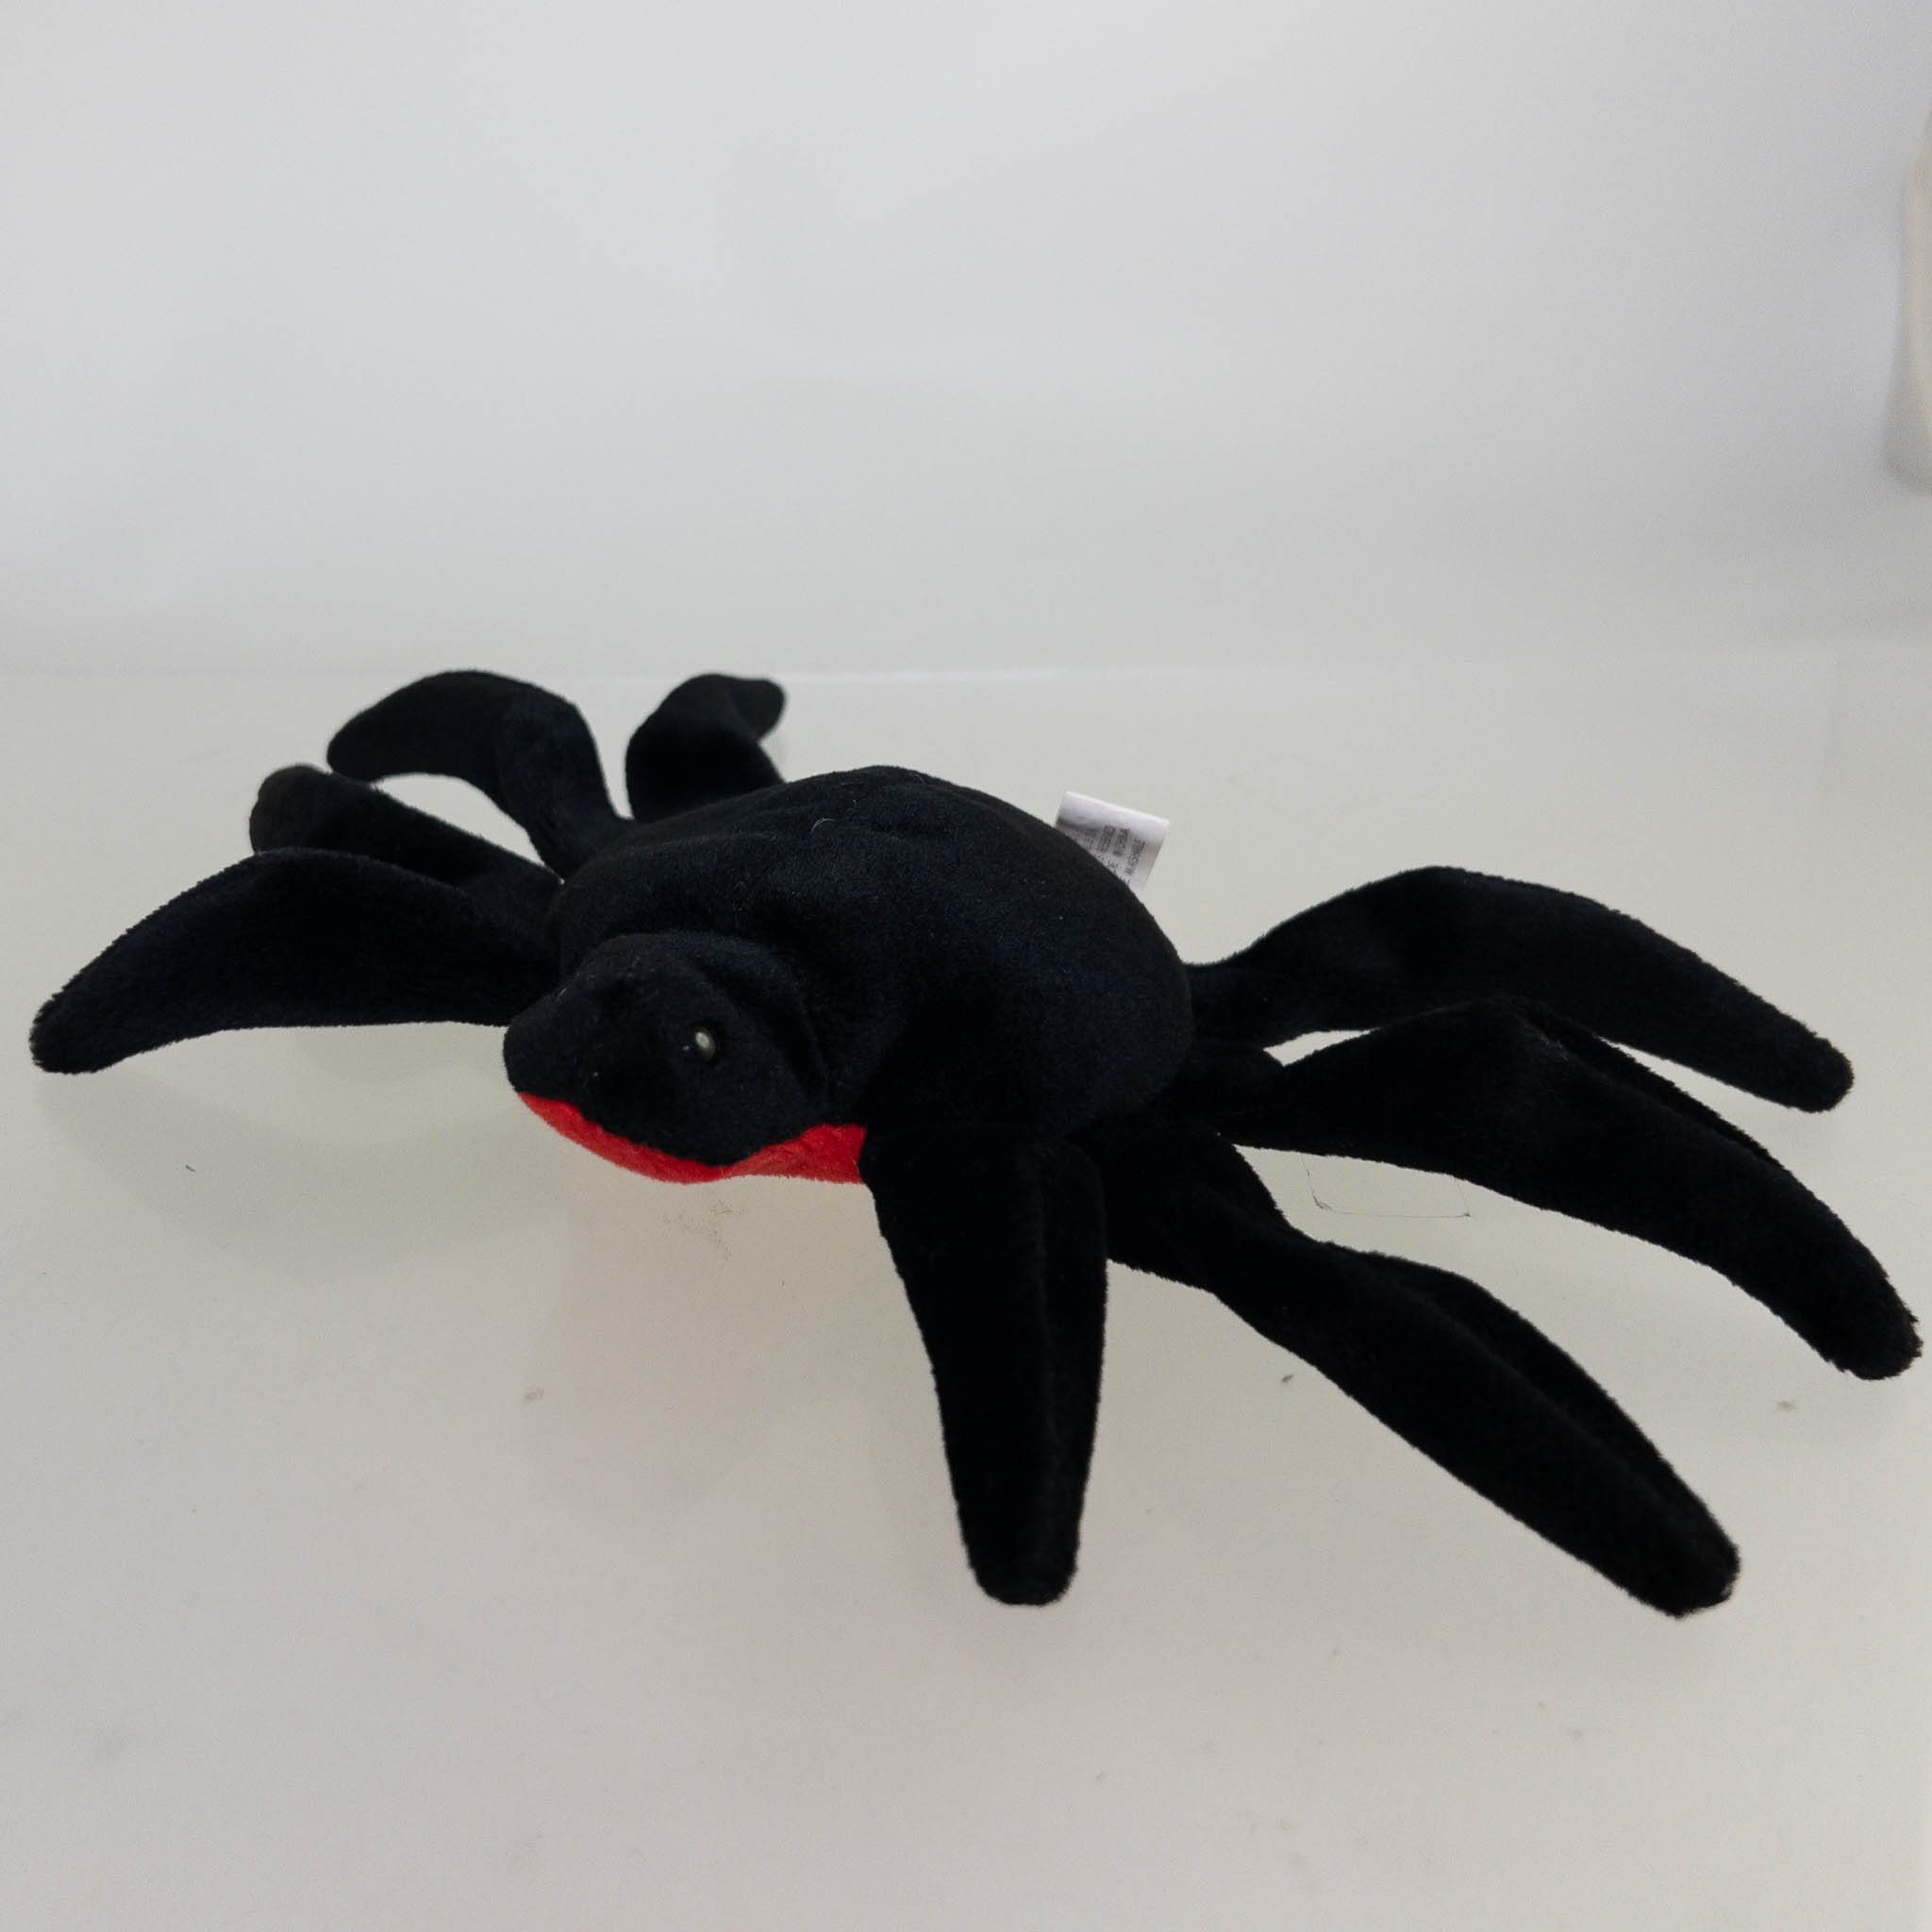 TY Beanie Baby - WEB the Black & Red Spider (No Hang Tag - 1st Gen Tush Tag)